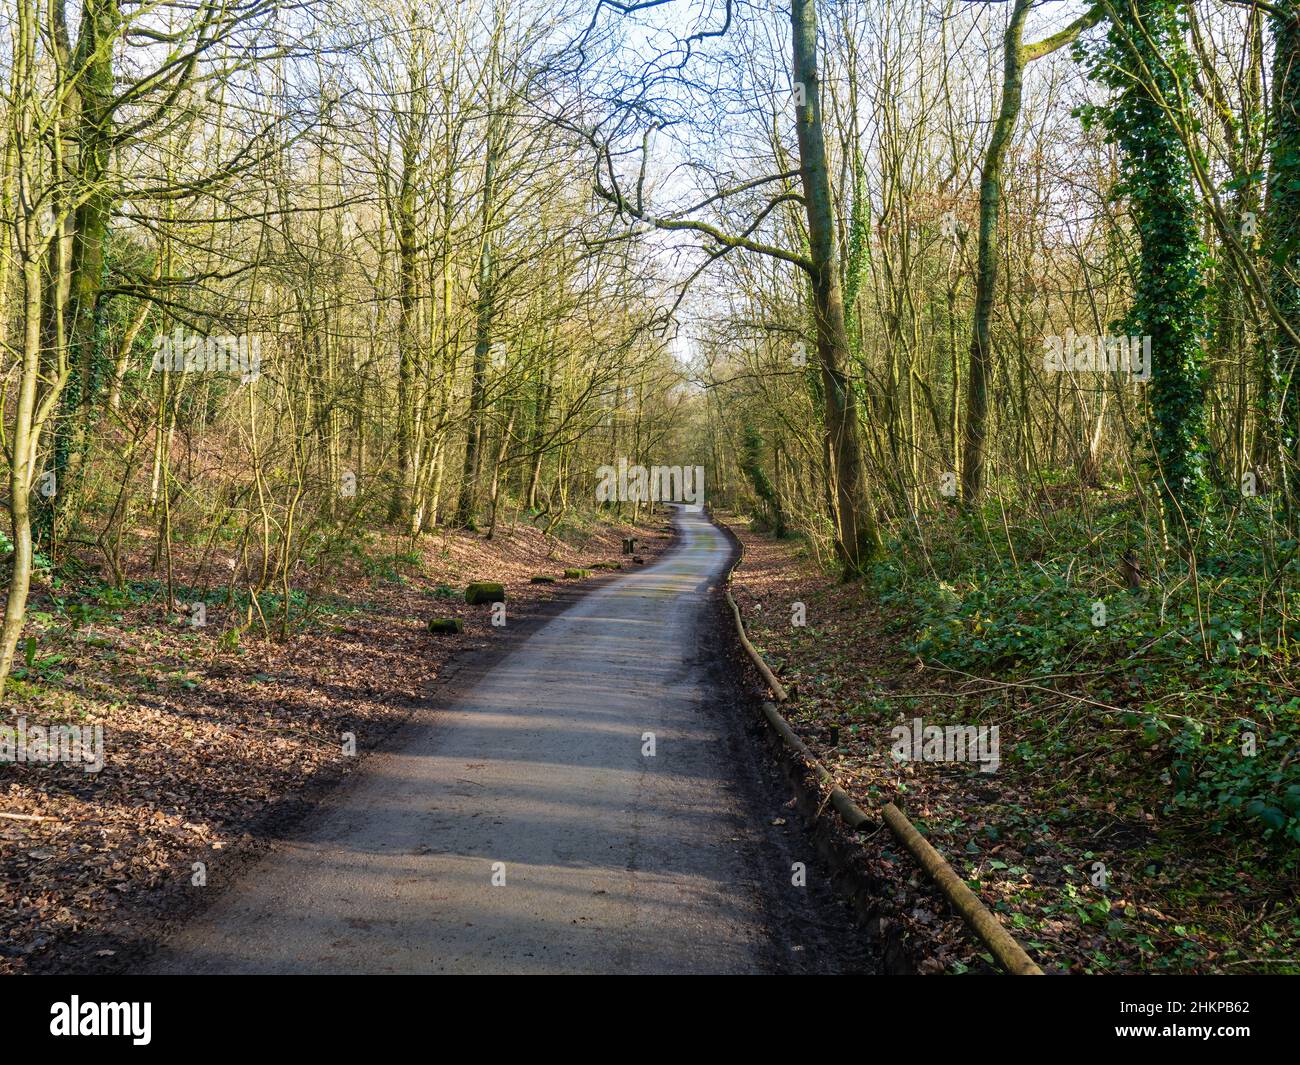 04.02.22 Rainford, Merseyside, UK. Siddings Lane is a nature reserver sitiuated near to Rainford, St Helens and is a former colliery workings. Stock Photo